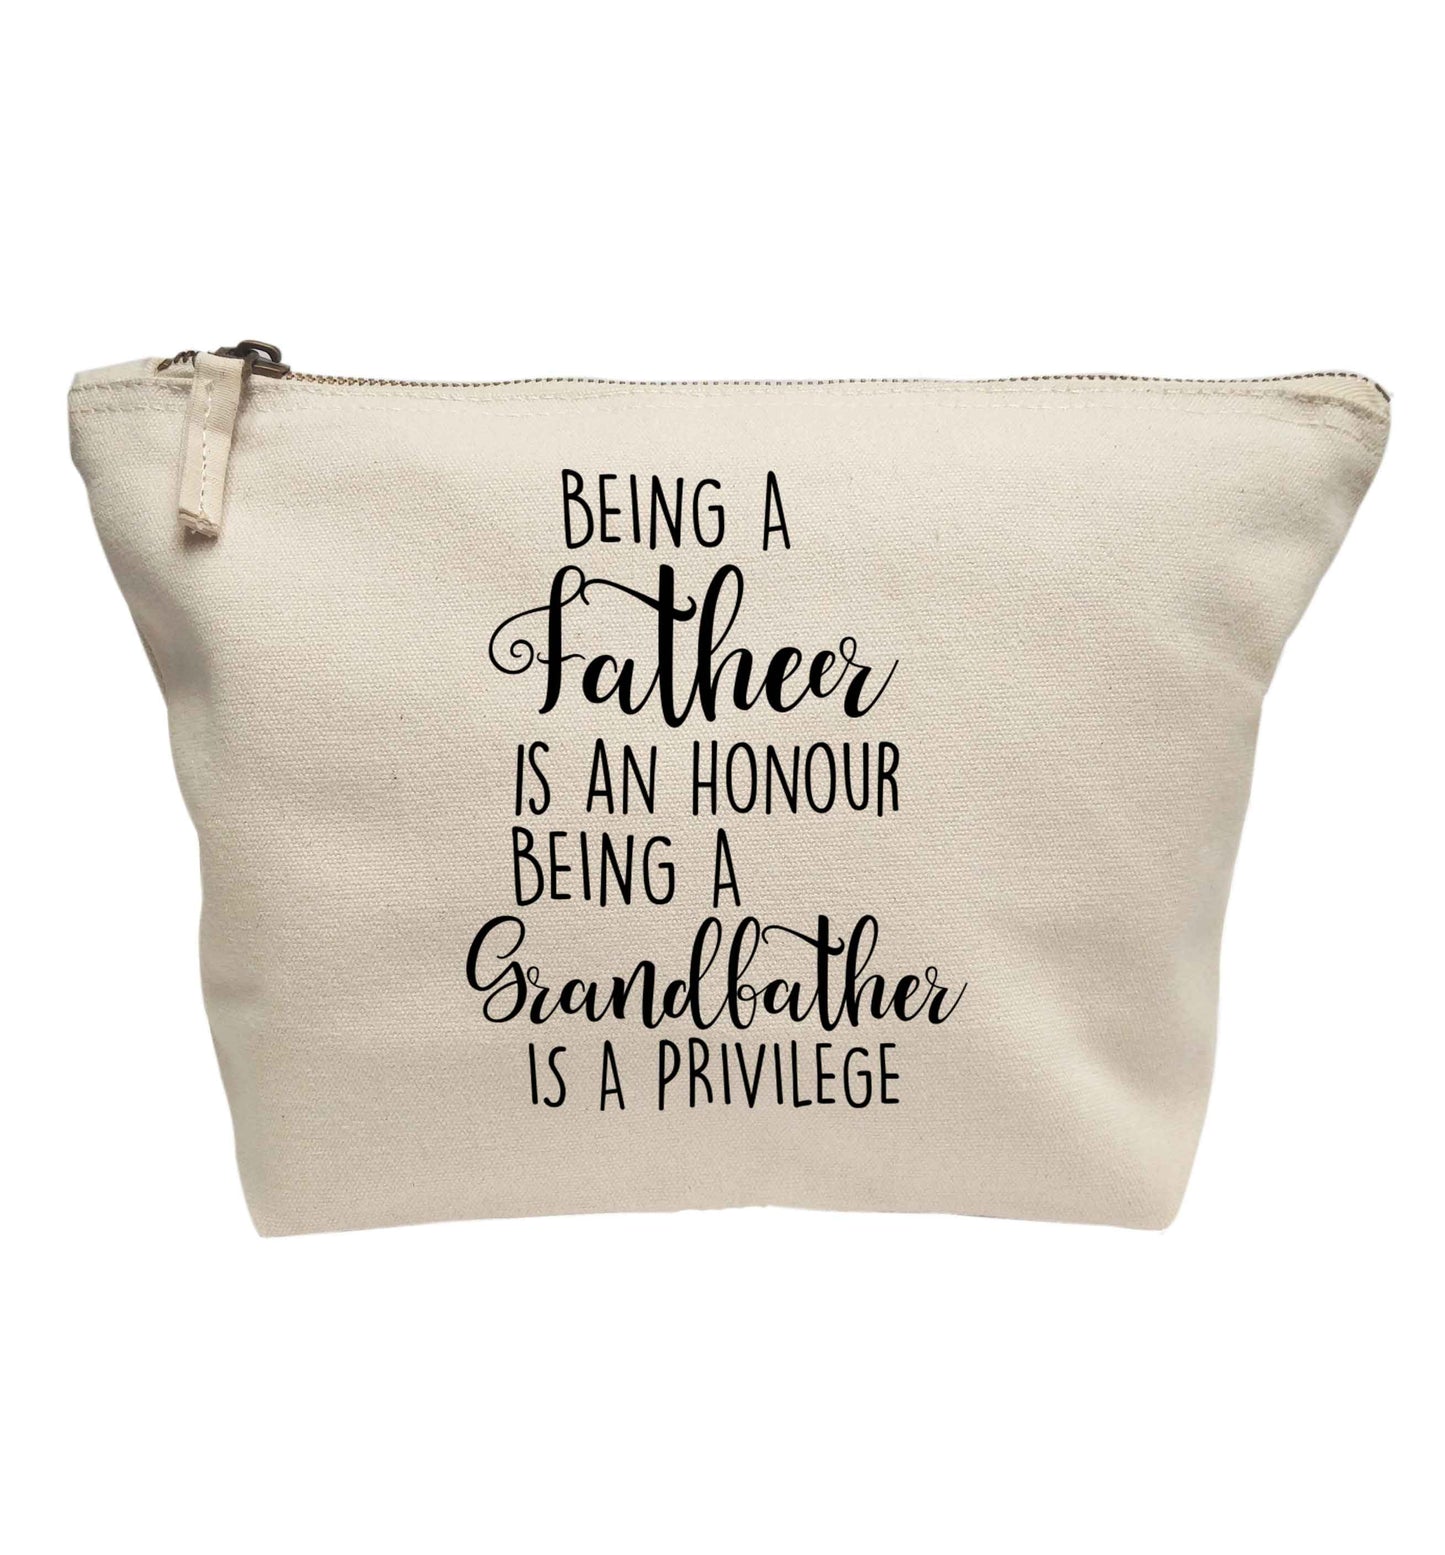 Being a father is an honour being a grandfather is a privilege | makeup / wash bag